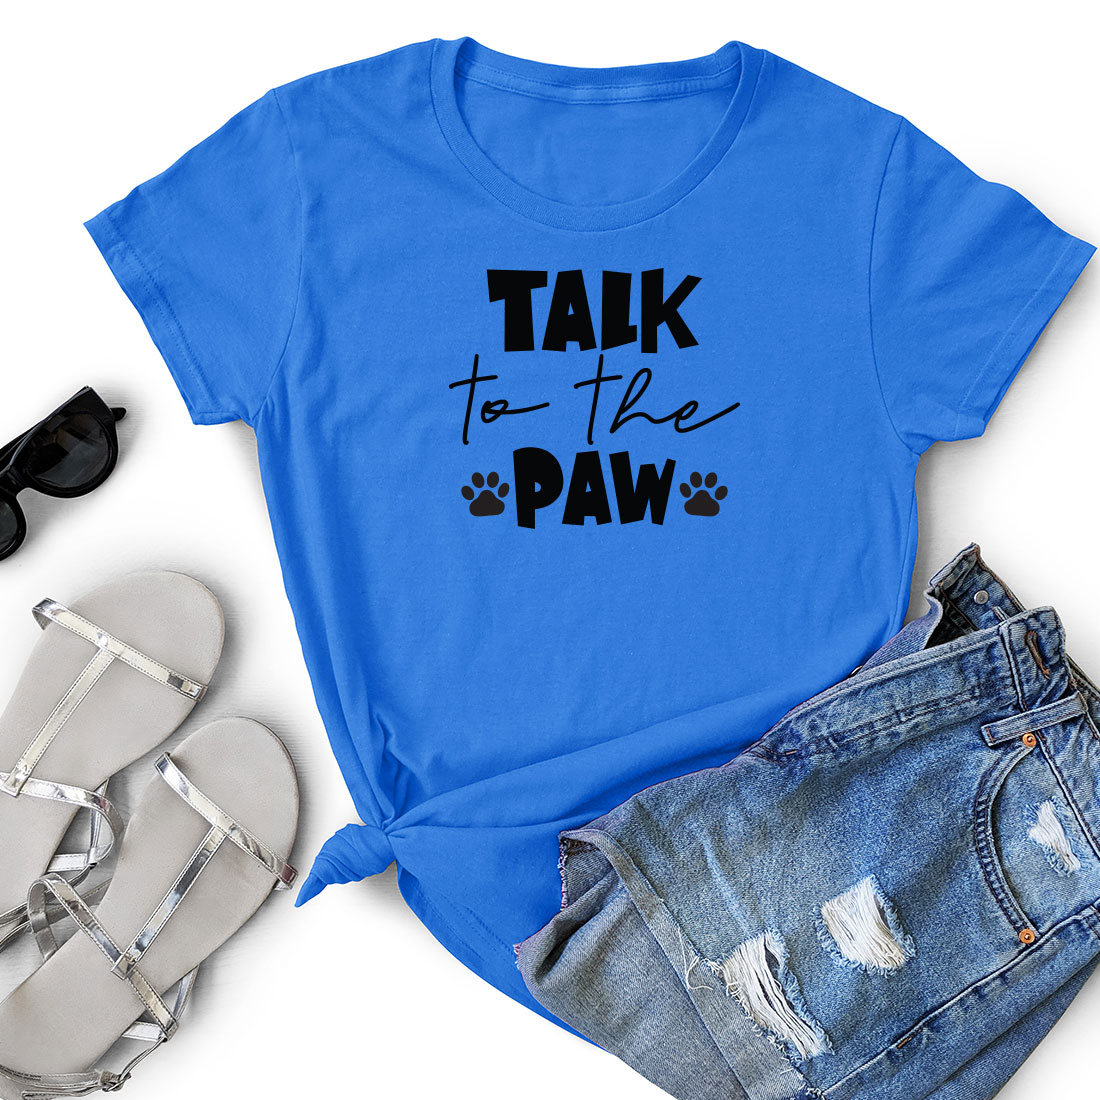 T - shirt that says talk to the paw on it.